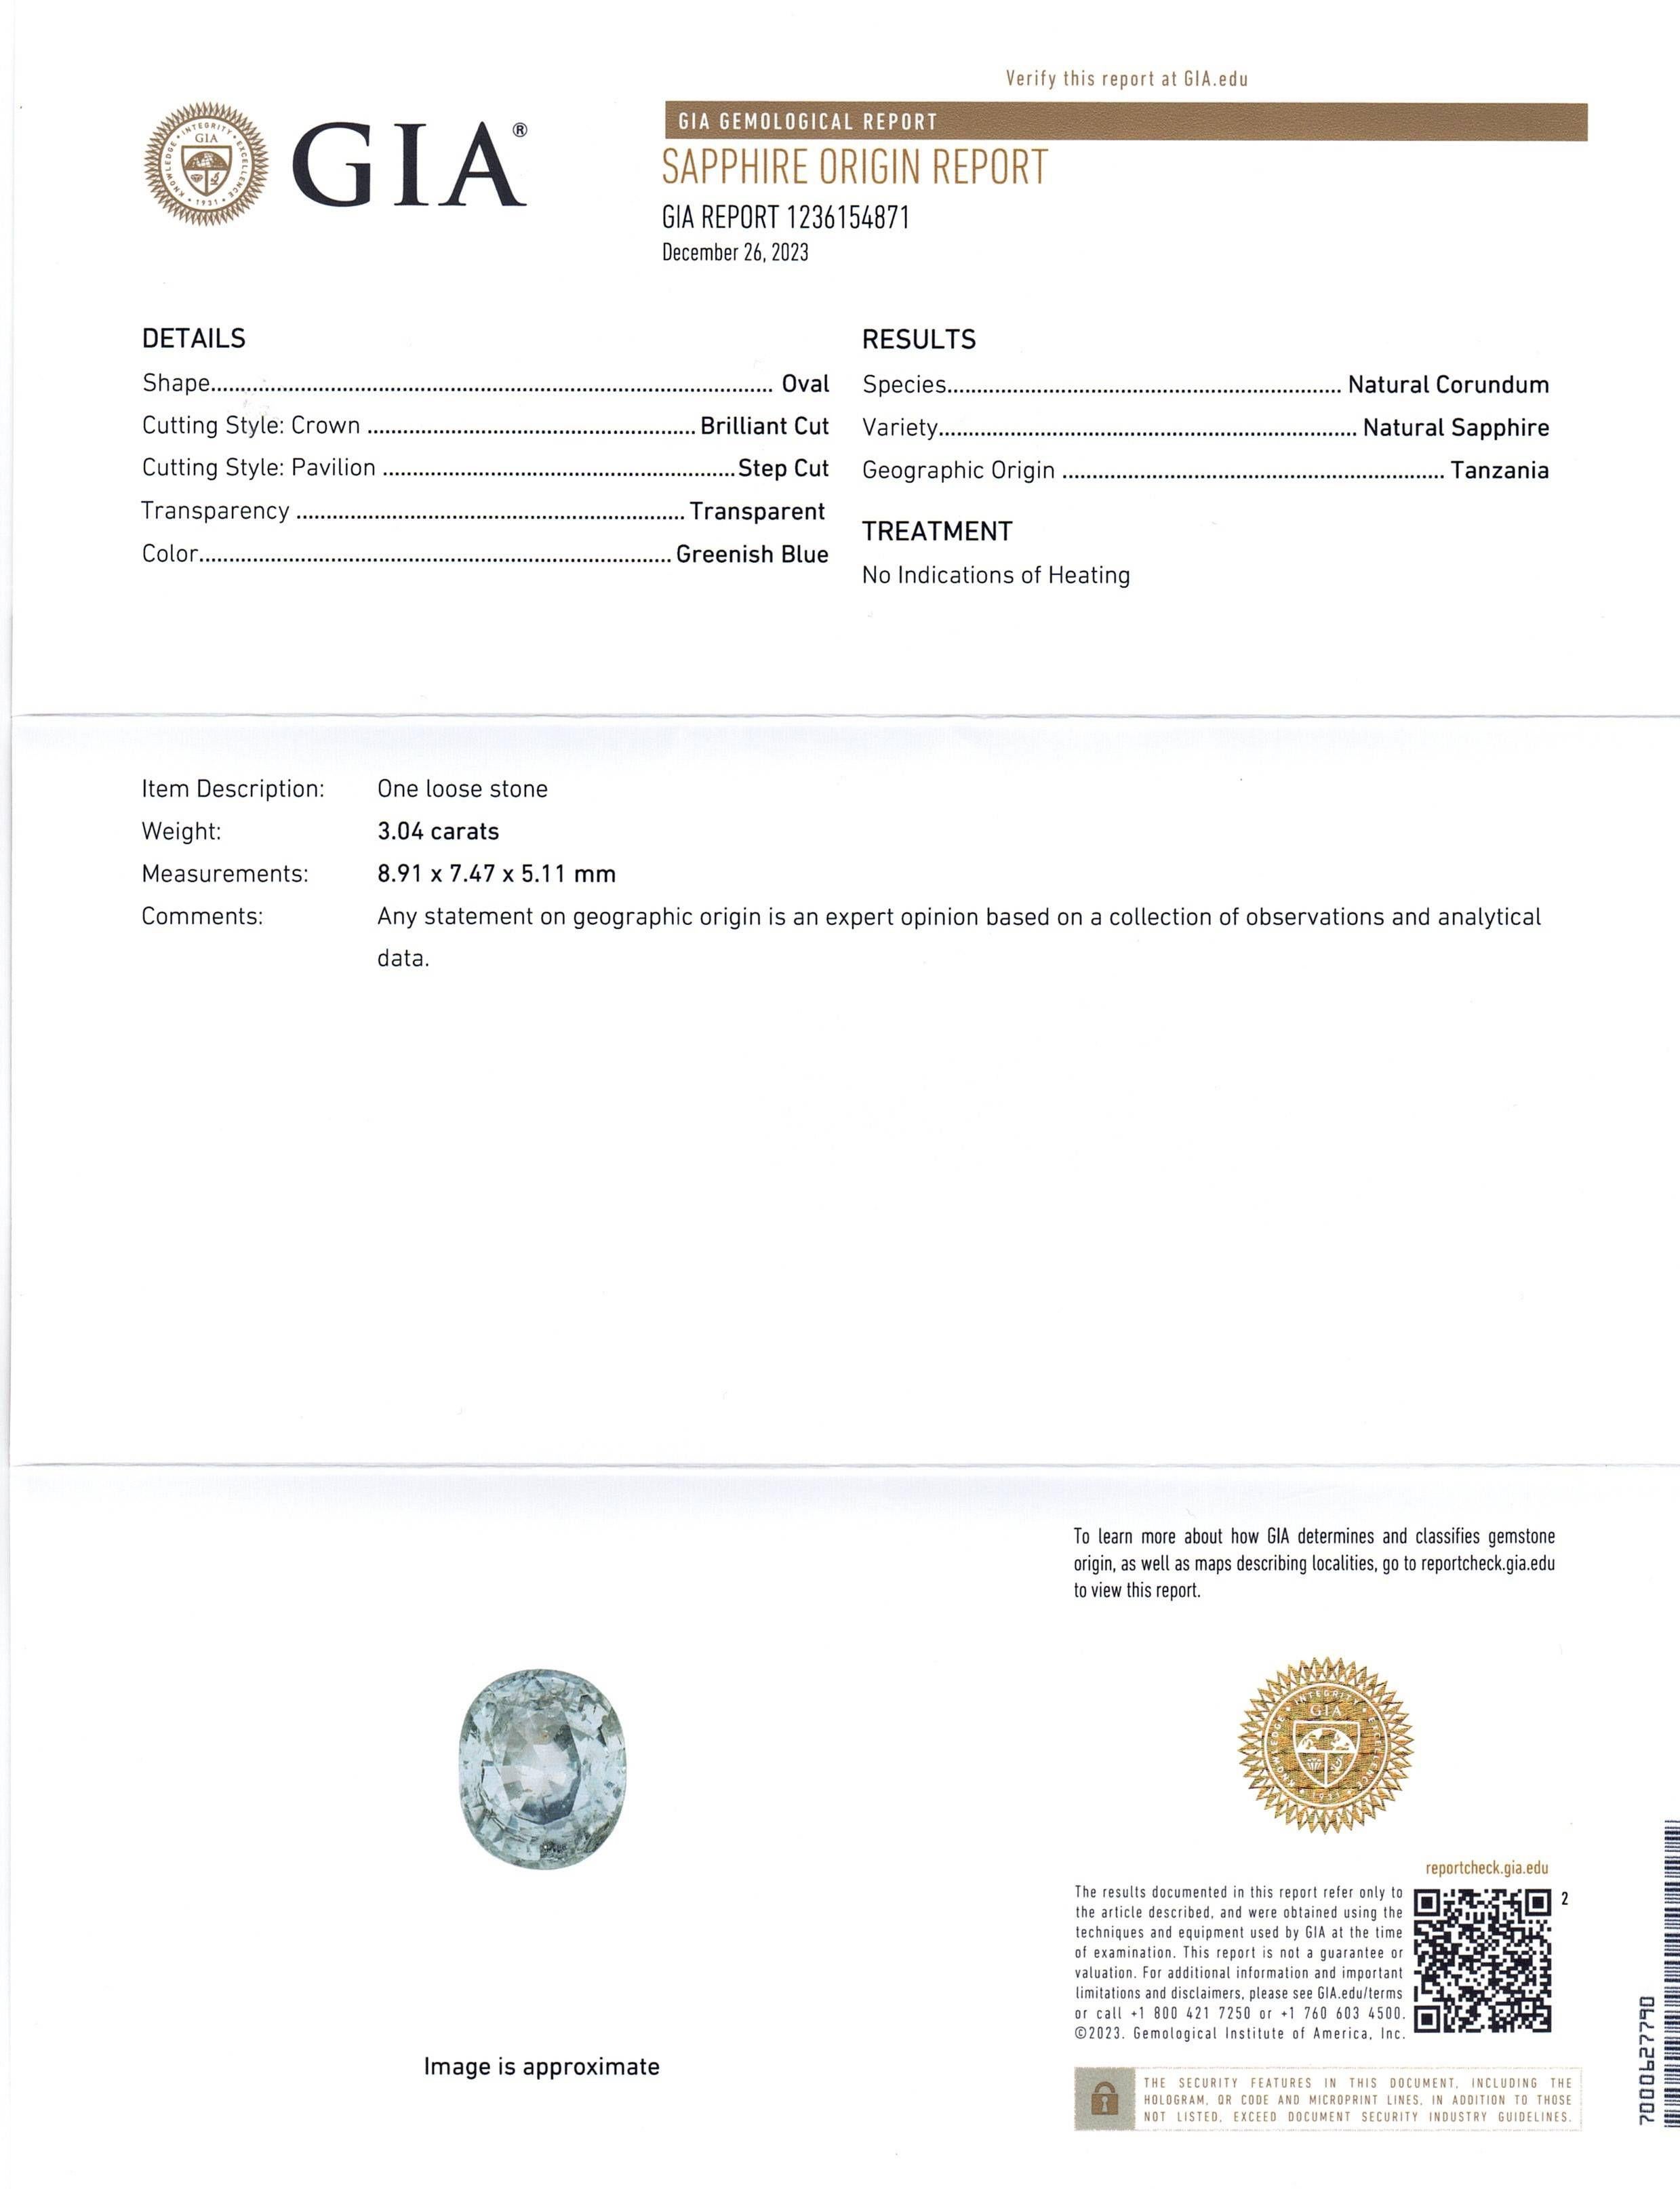 This is a stunning GIA Certified Sapphire 


The GIA report reads as follows:

GIA Report Number: 1236154871
Shape: Oval
Cutting Style: 
Cutting Style: Crown: Brilliant Cut
Cutting Style: Pavilion: Step Cut
Transparency: Transparent
Colour: Greenish